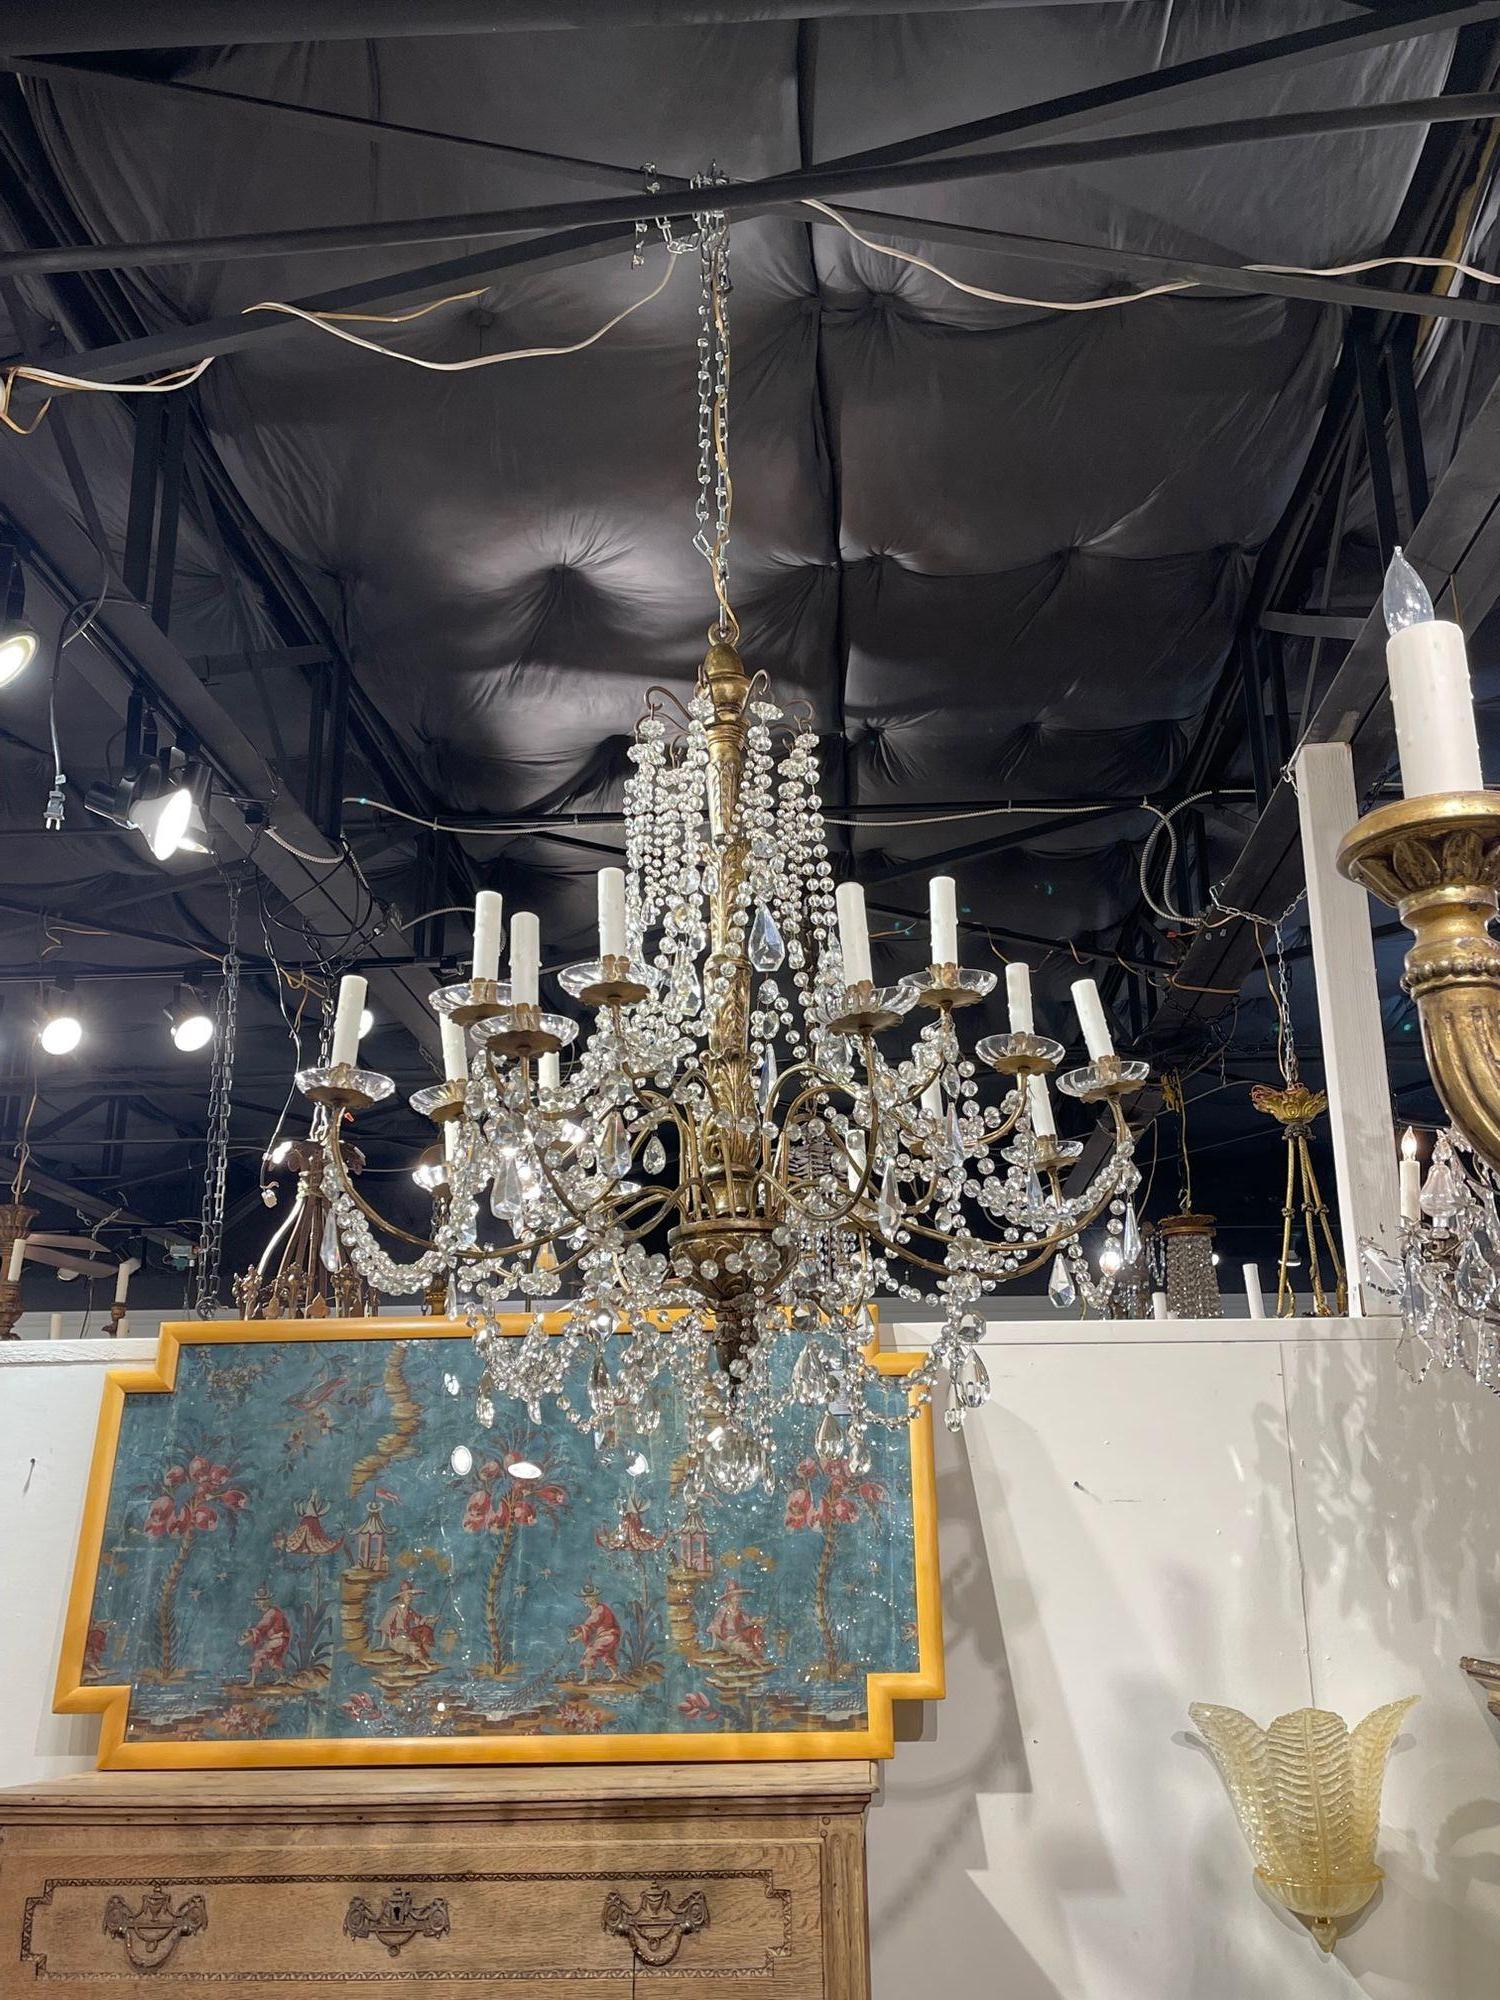 Very fine 19th century Italian giltwood and crystal chandelier with 16 lights. Featuring a beautiful carved based and a plethora of glistening crystal.  Stunning!!